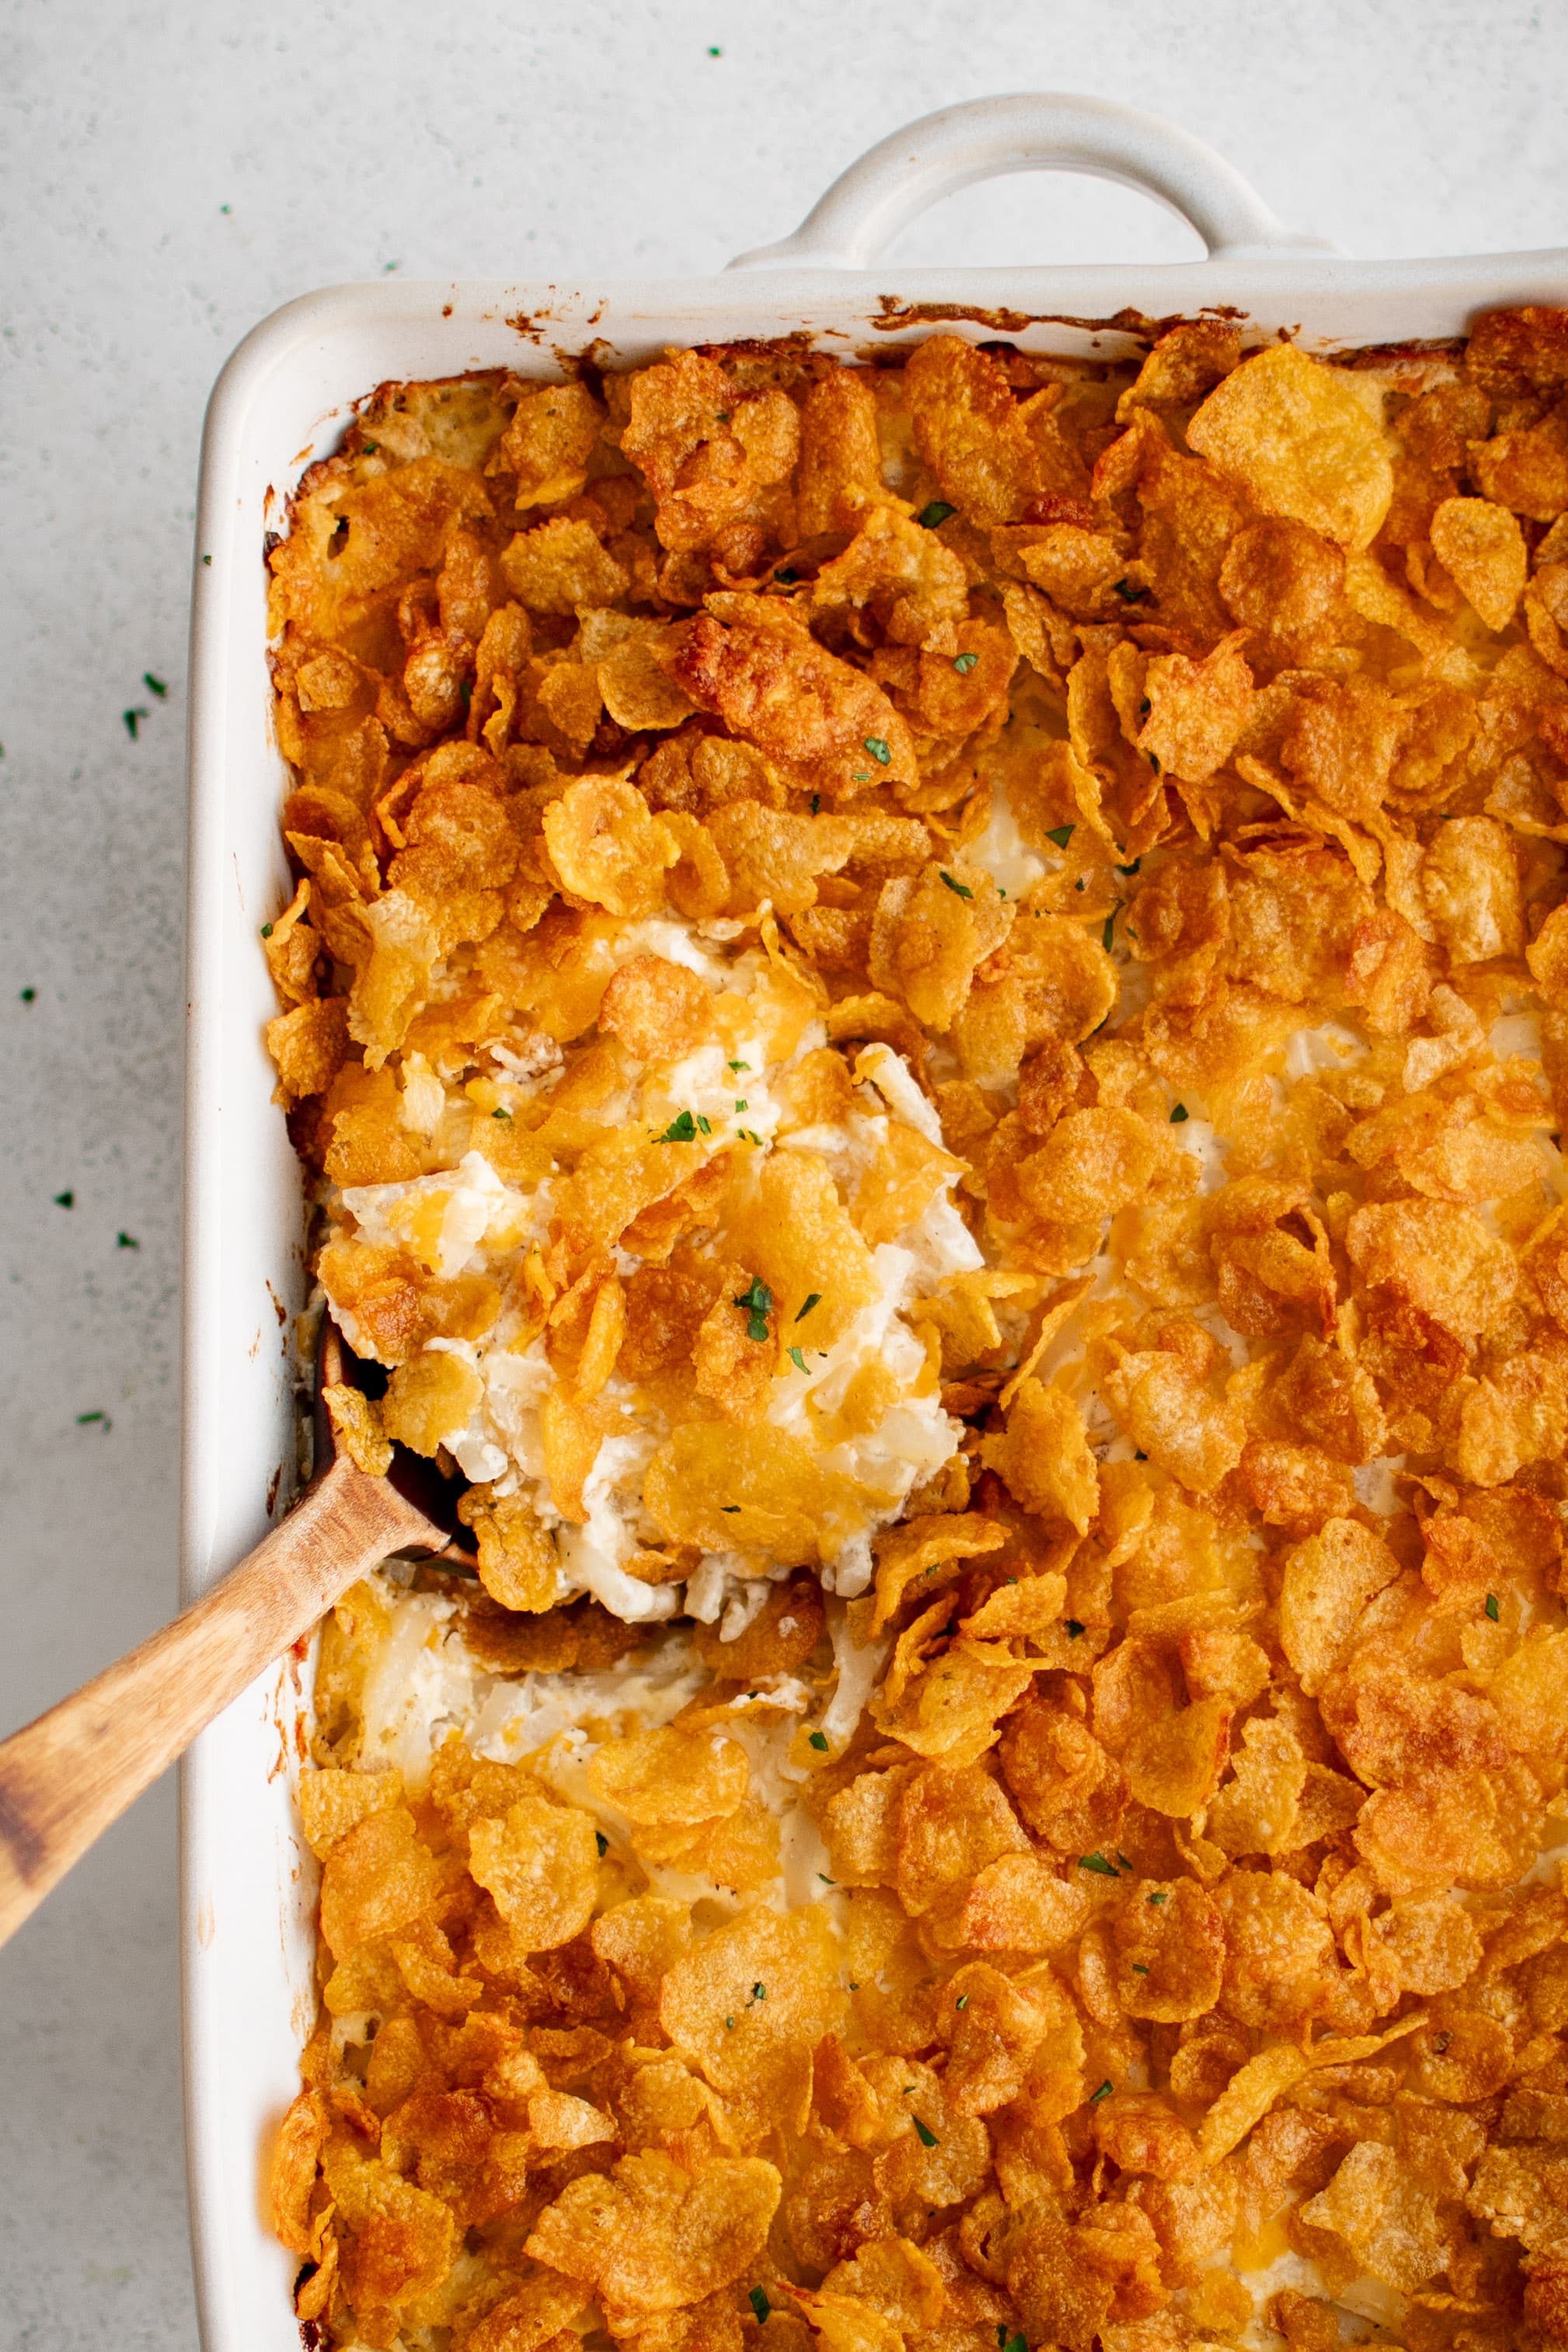 Wooden serving spoon in a large white casserole dish filled with gooey, cheesy baked funeral potatoes topped with crispy cornflakes.